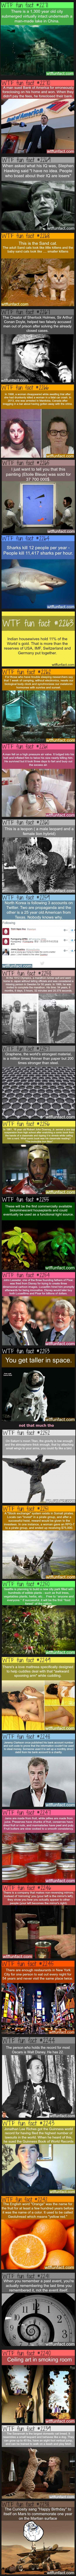 34 WTF Fun Facts That Will Blow Your Mind 